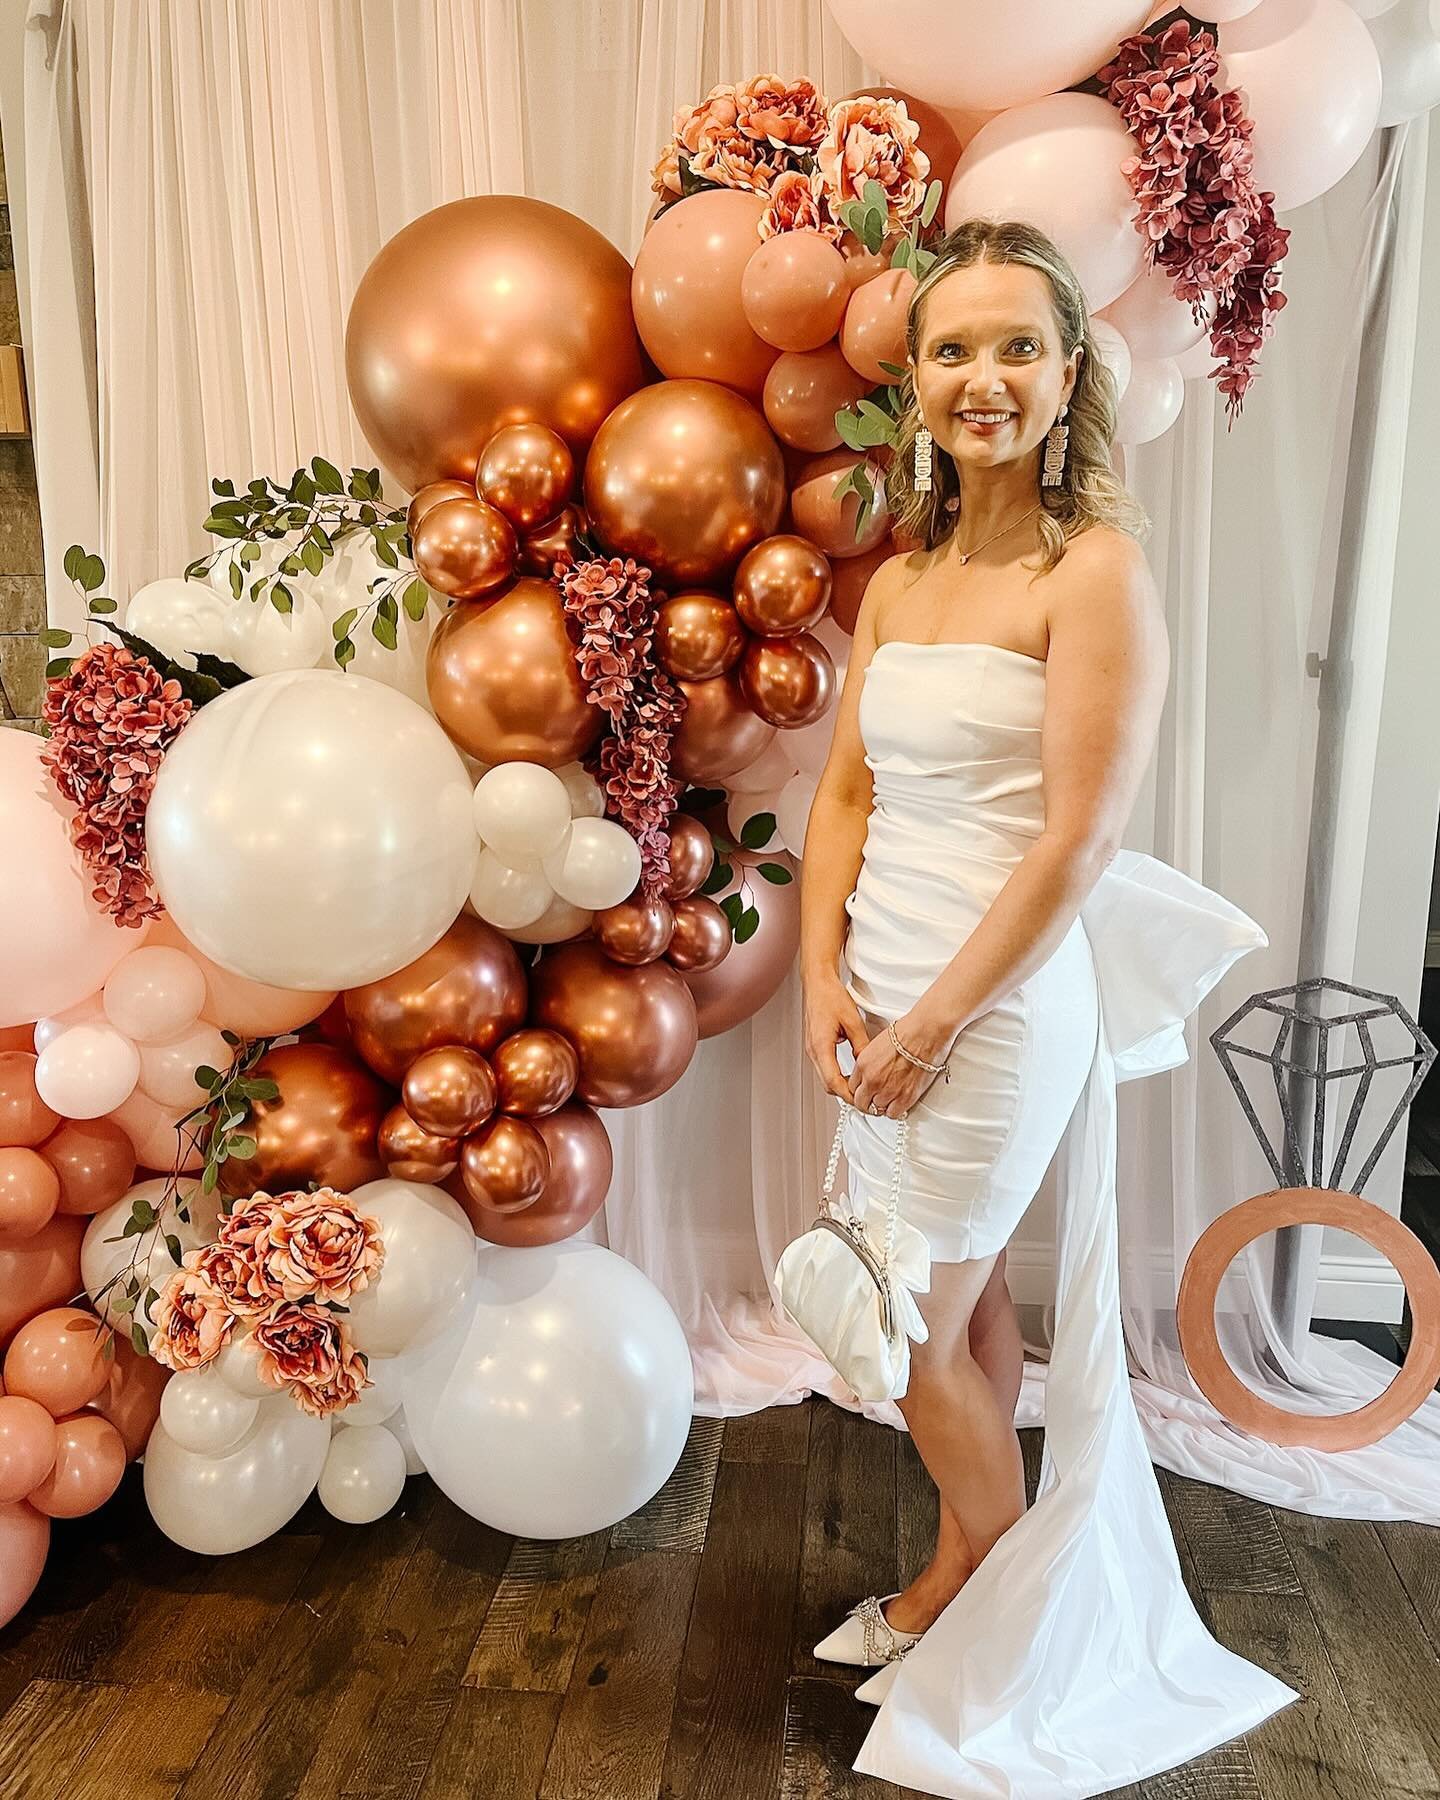 🤍💍Bach &amp; Boujee💍🤍
First, how stunning is this bride?! 👰🏼 We love getting to help our brides (&amp;friends) celebrate BIG with stunning balloon backdrops for their wedding events. This Bachelorette Brunch called for a boujee bubbly bar, a go